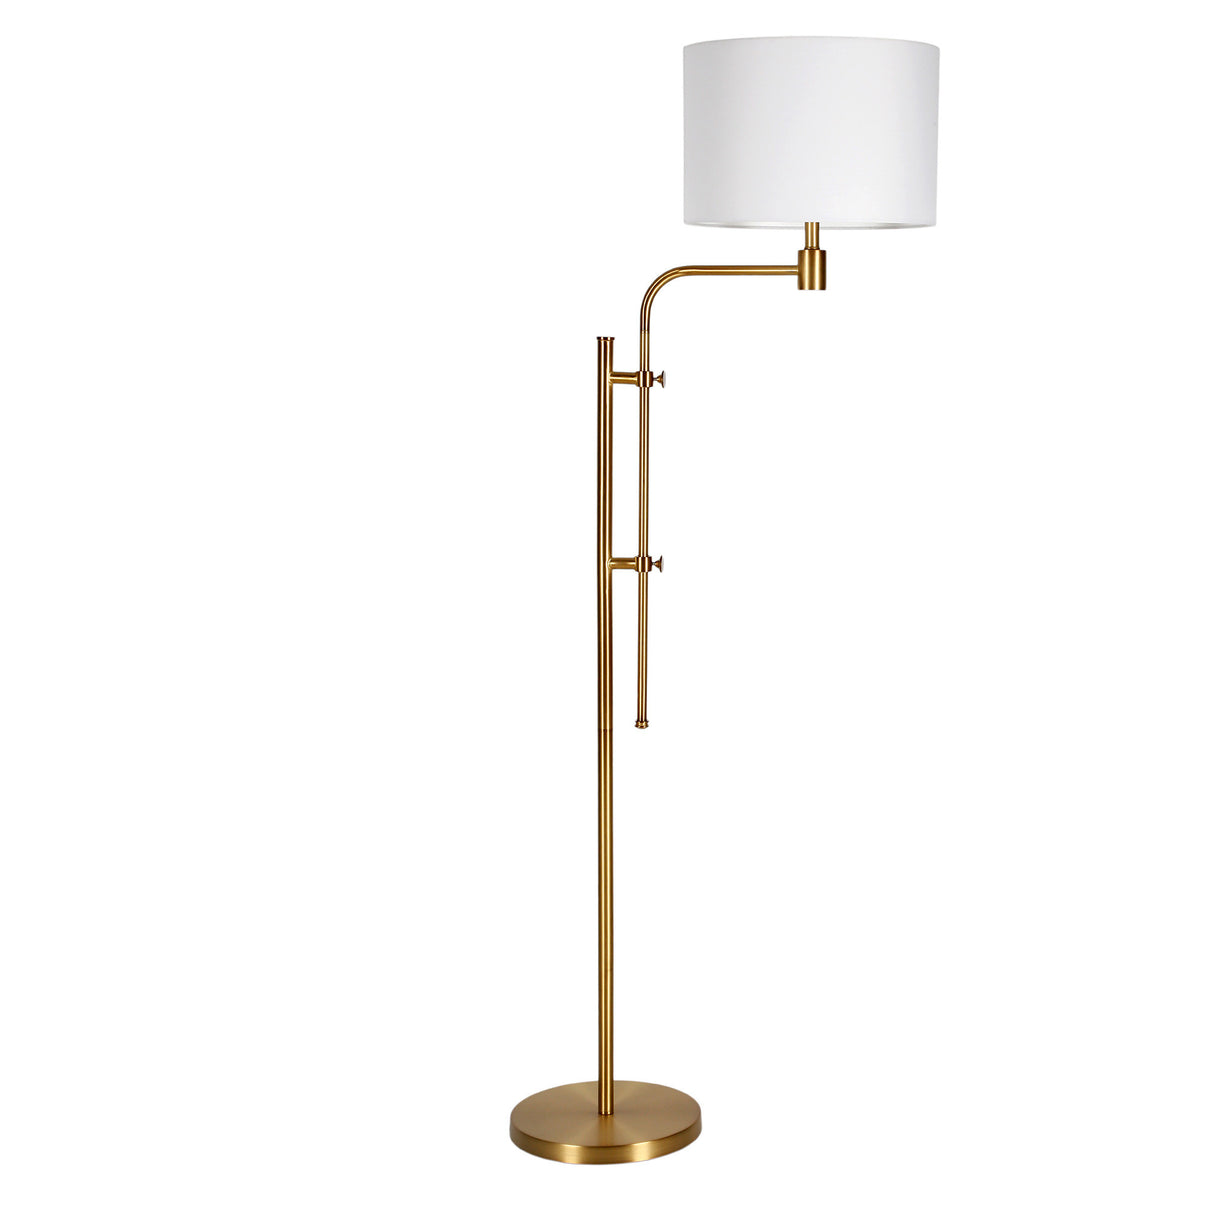 71" Brass Adjustable Traditional Shaped Floor Lamp With White Frosted Glass Drum Shade